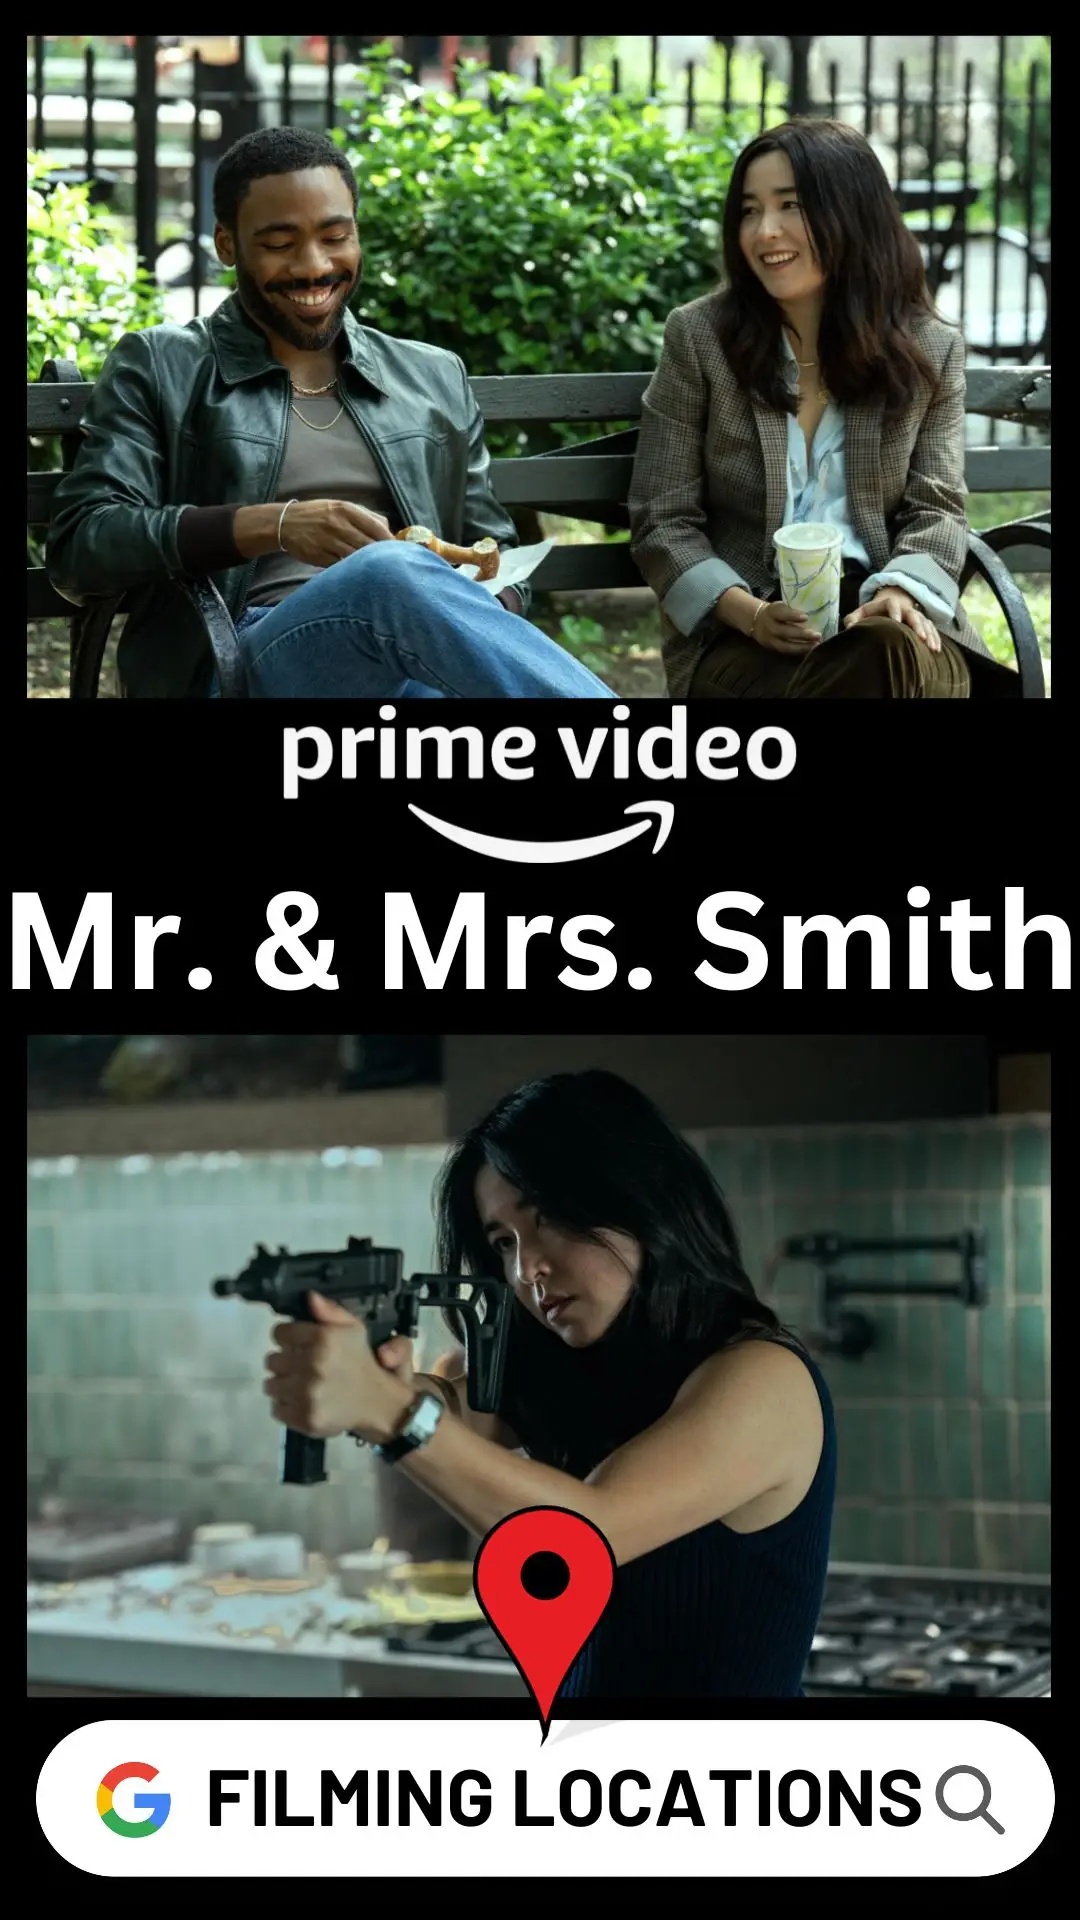 Mr. & Mrs. Smith Filming Locations (TV Series 2024)